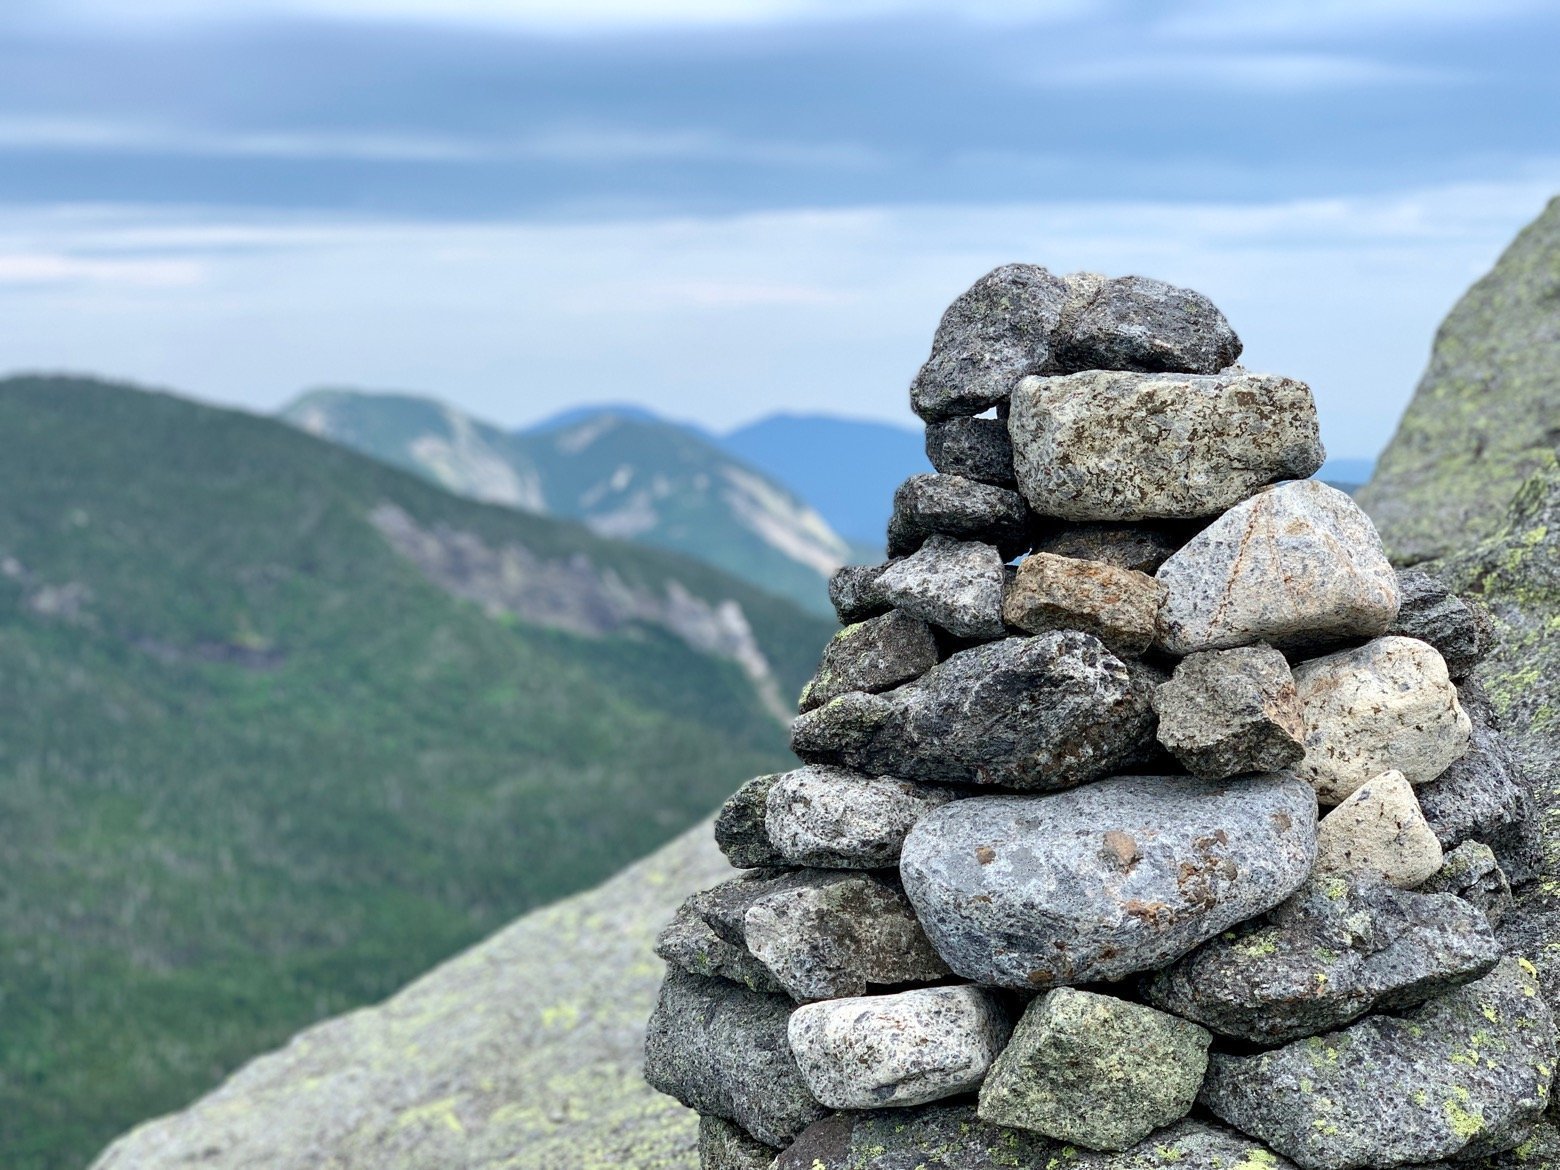 A rock cairn guiding the way